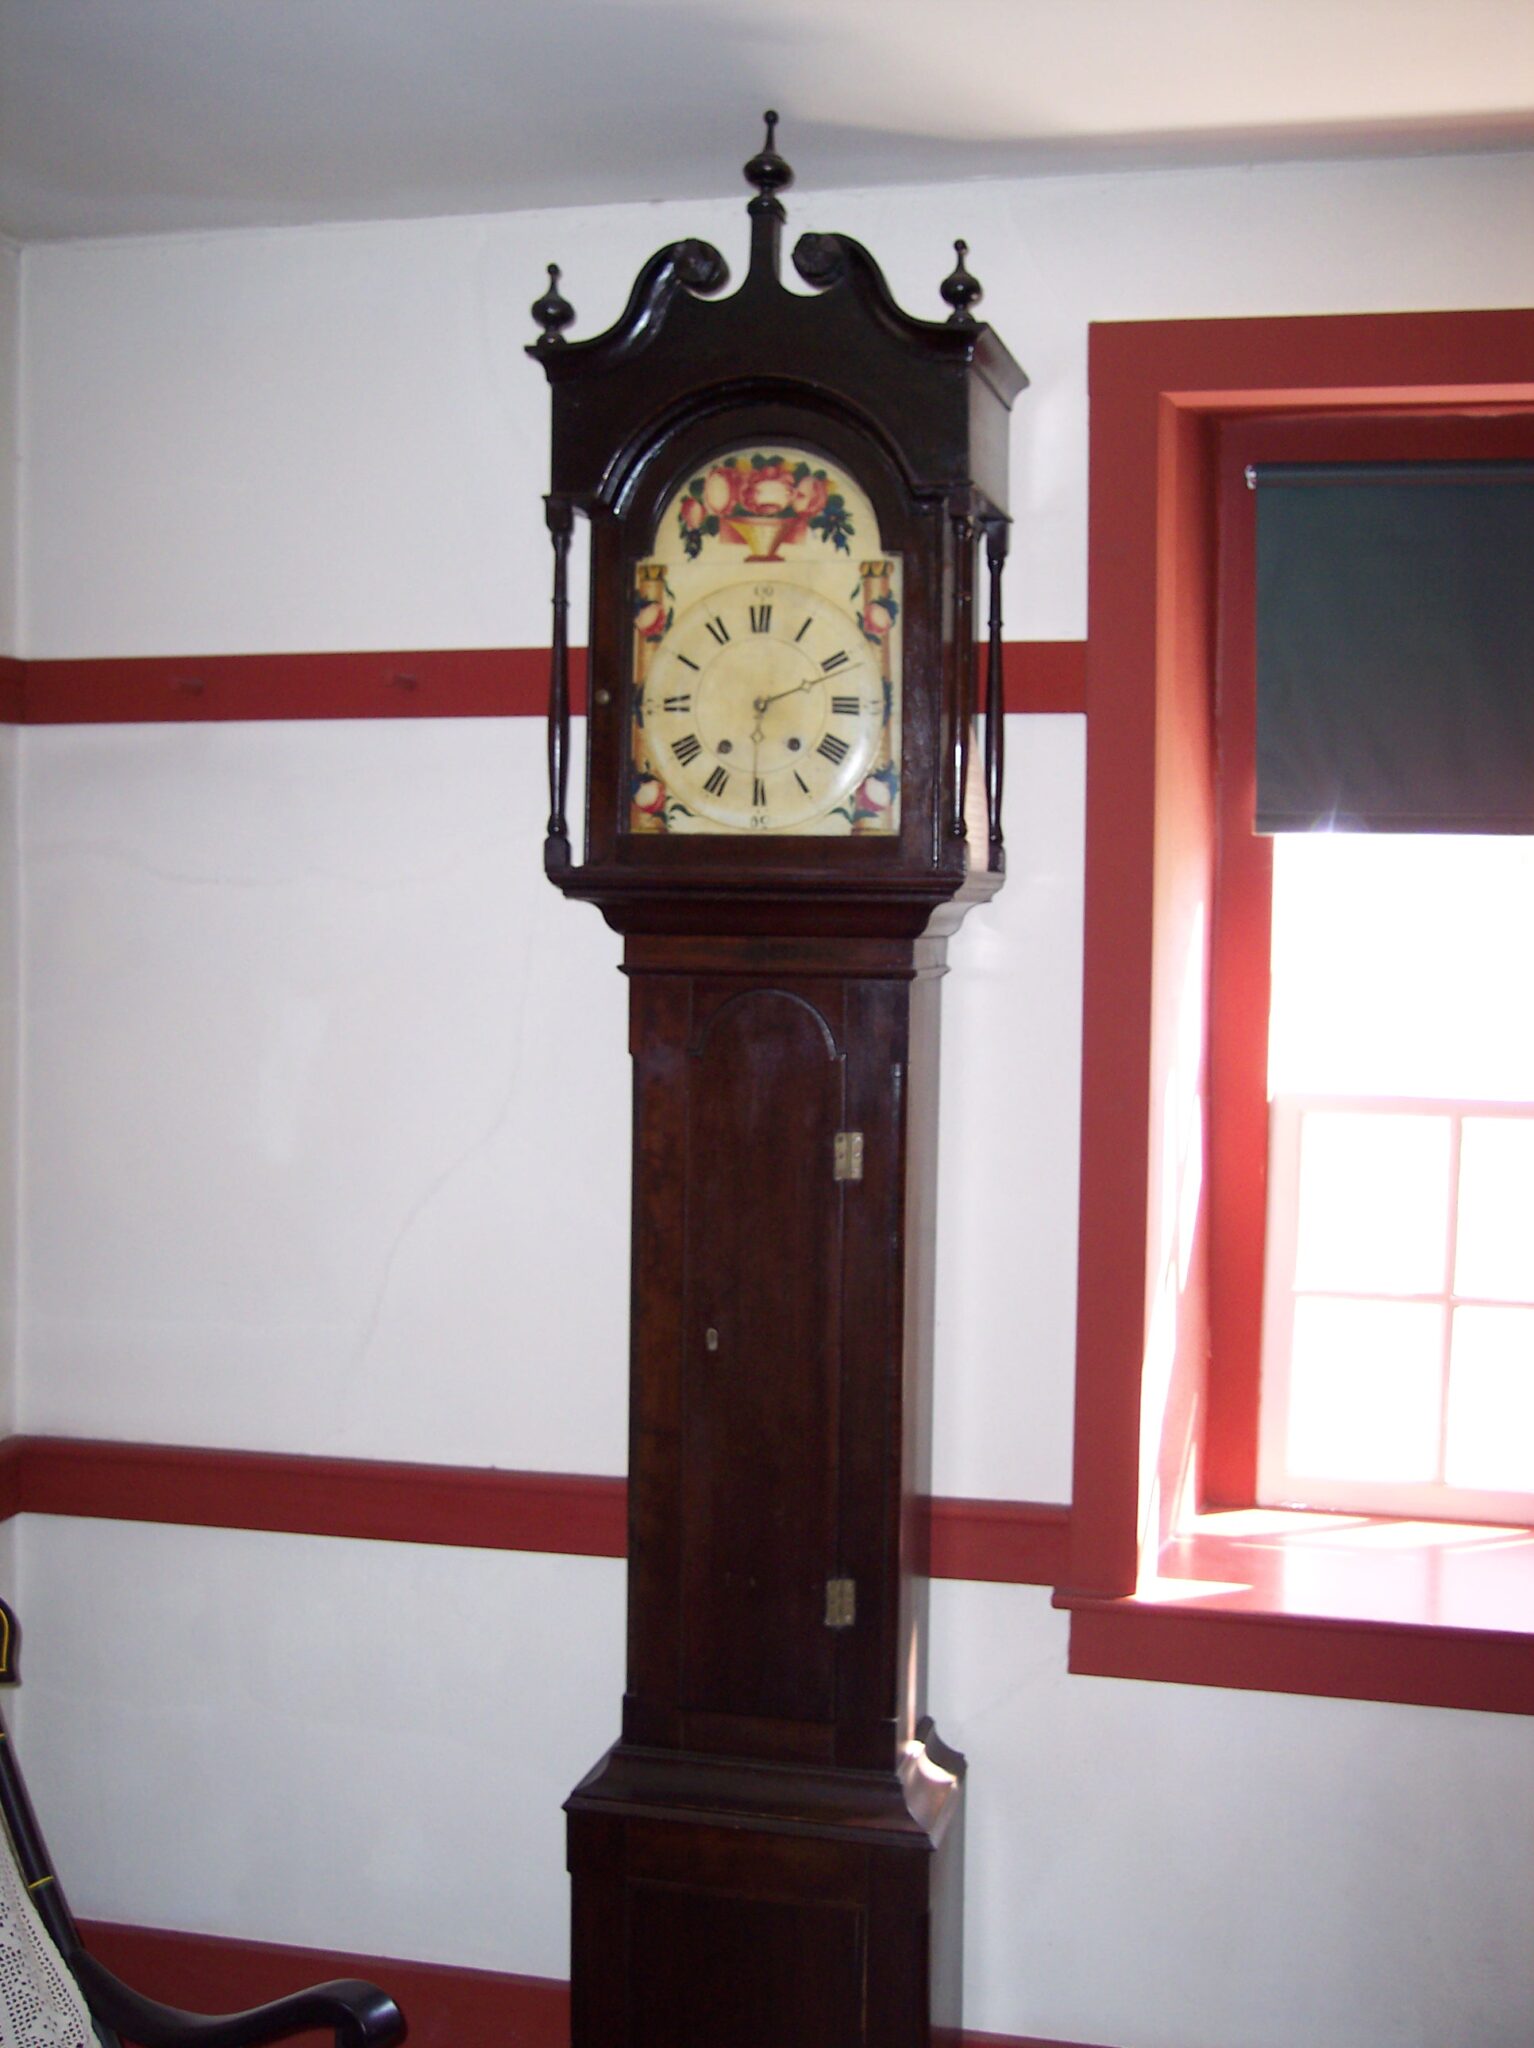 A tall, wooden, ornate grandfather clock